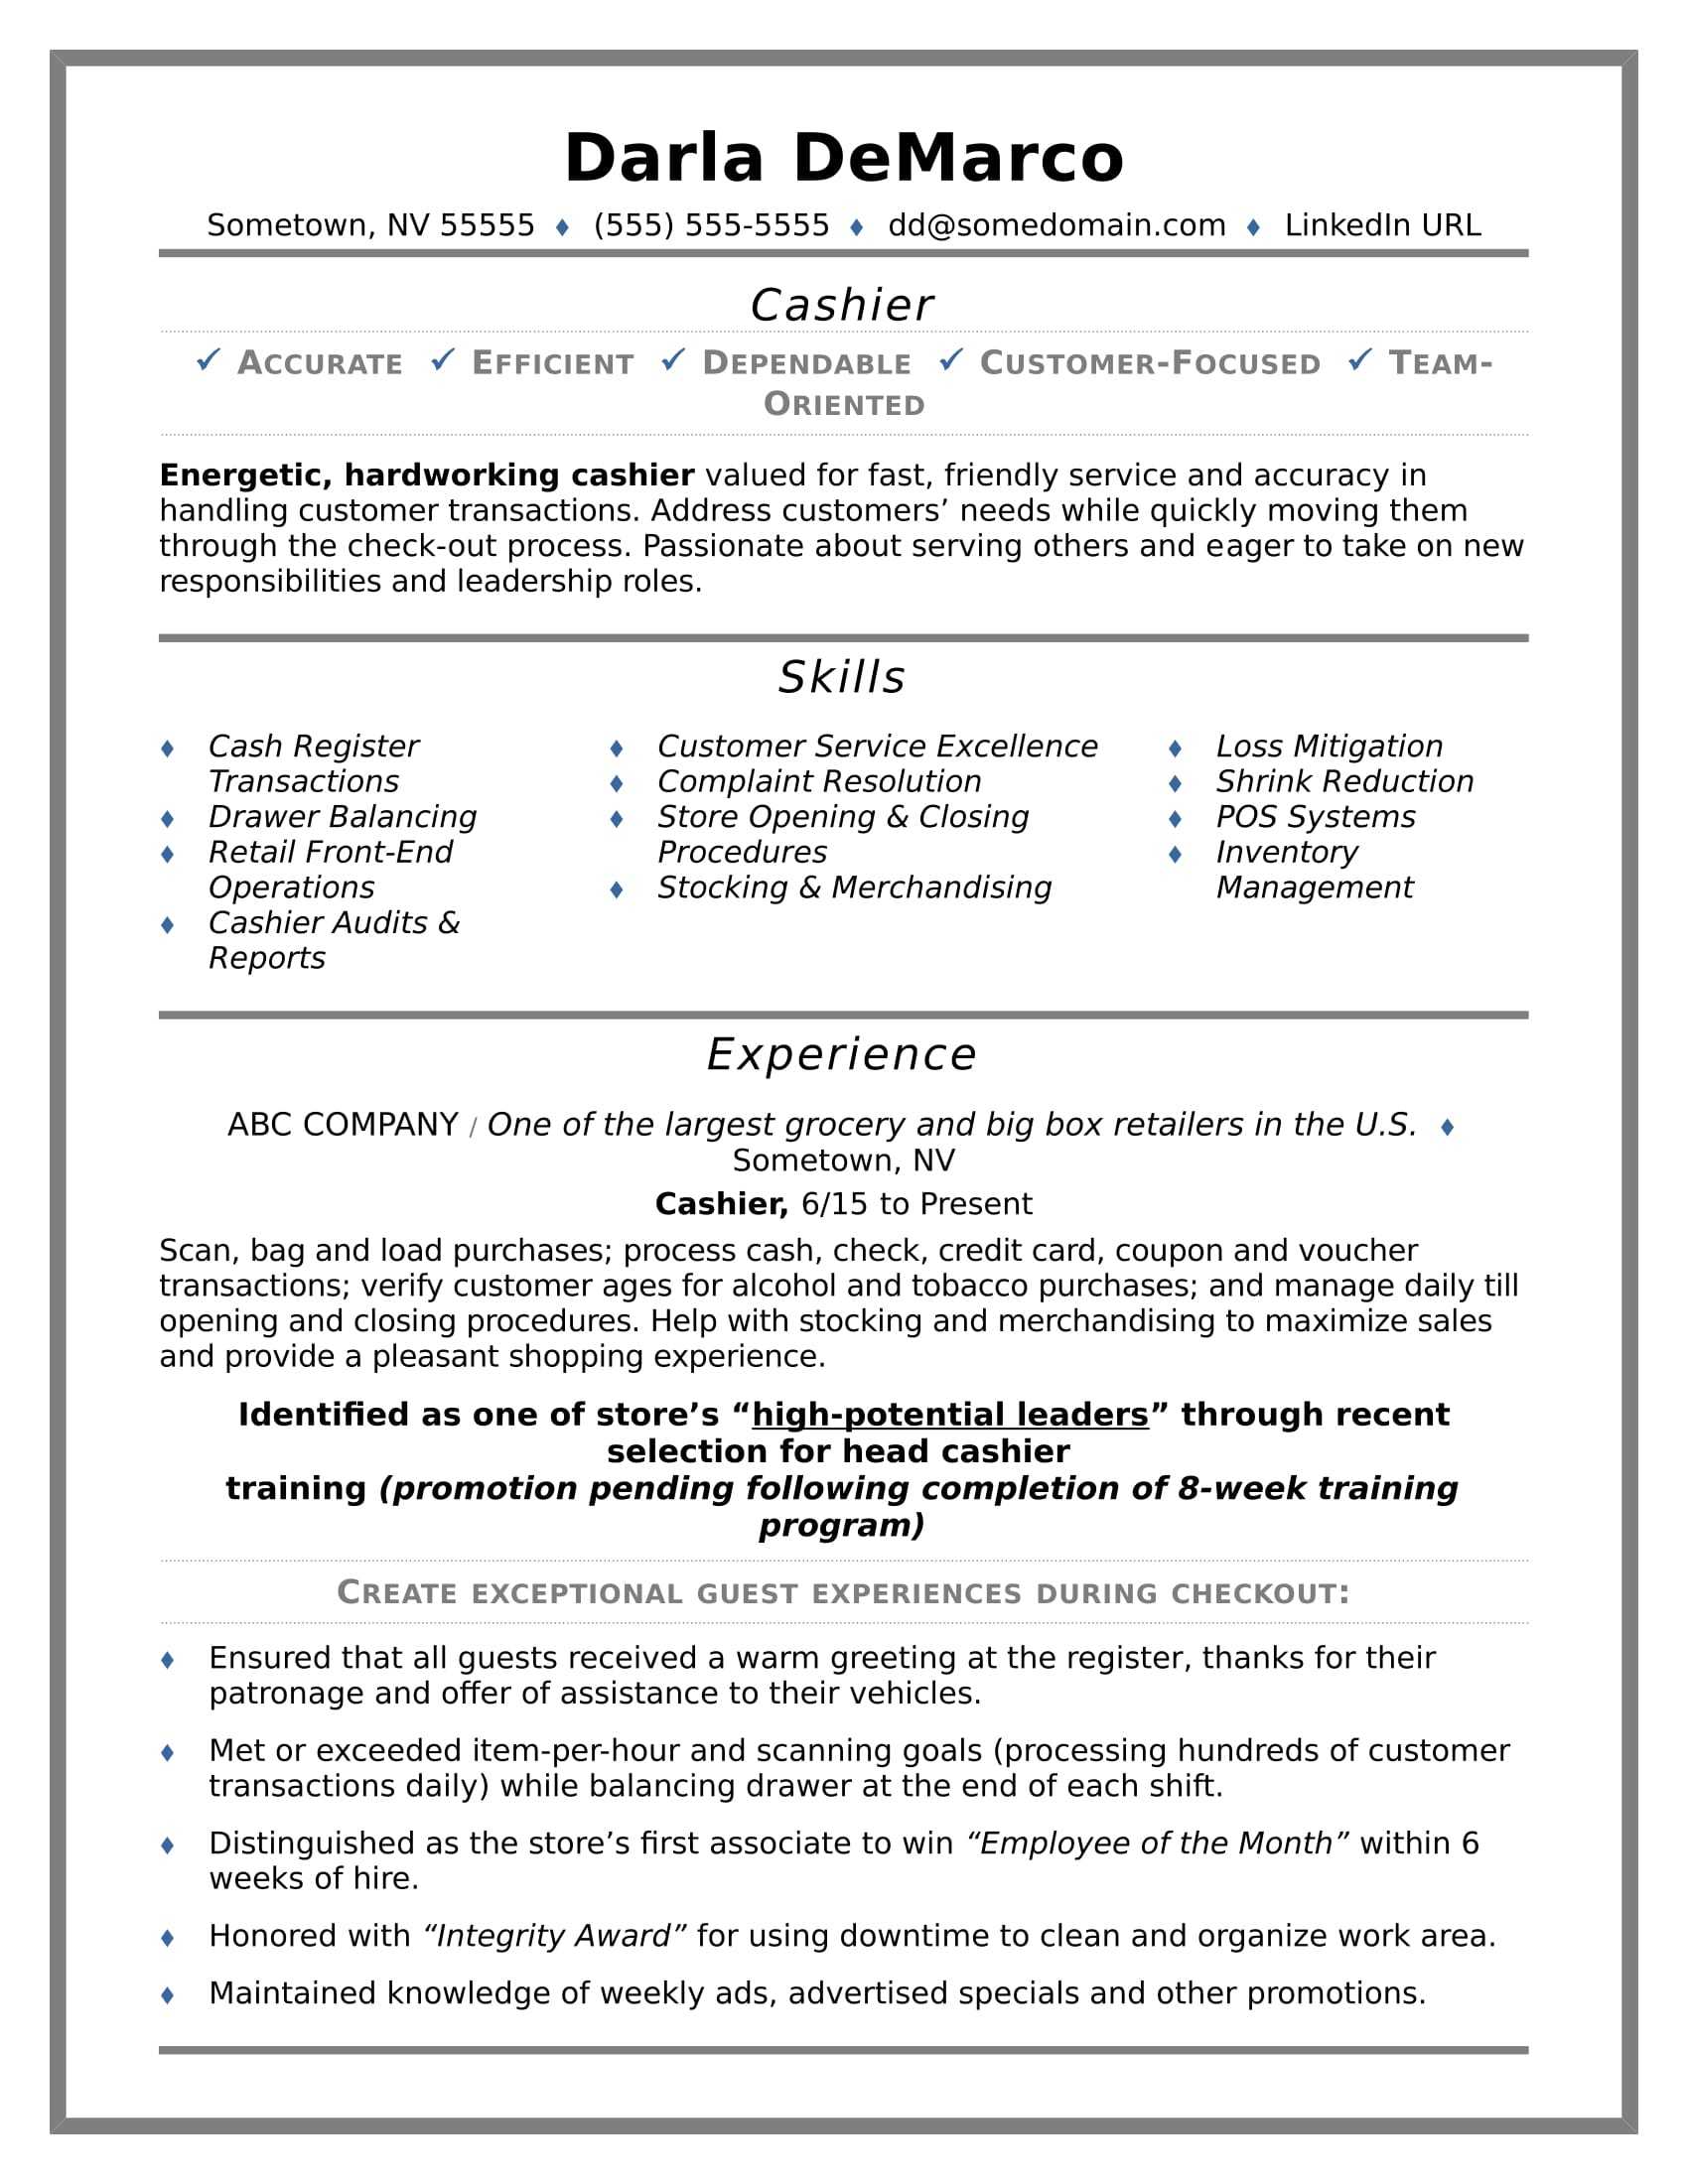 Cashier Resume Sample | Monster With Service Job Card Template